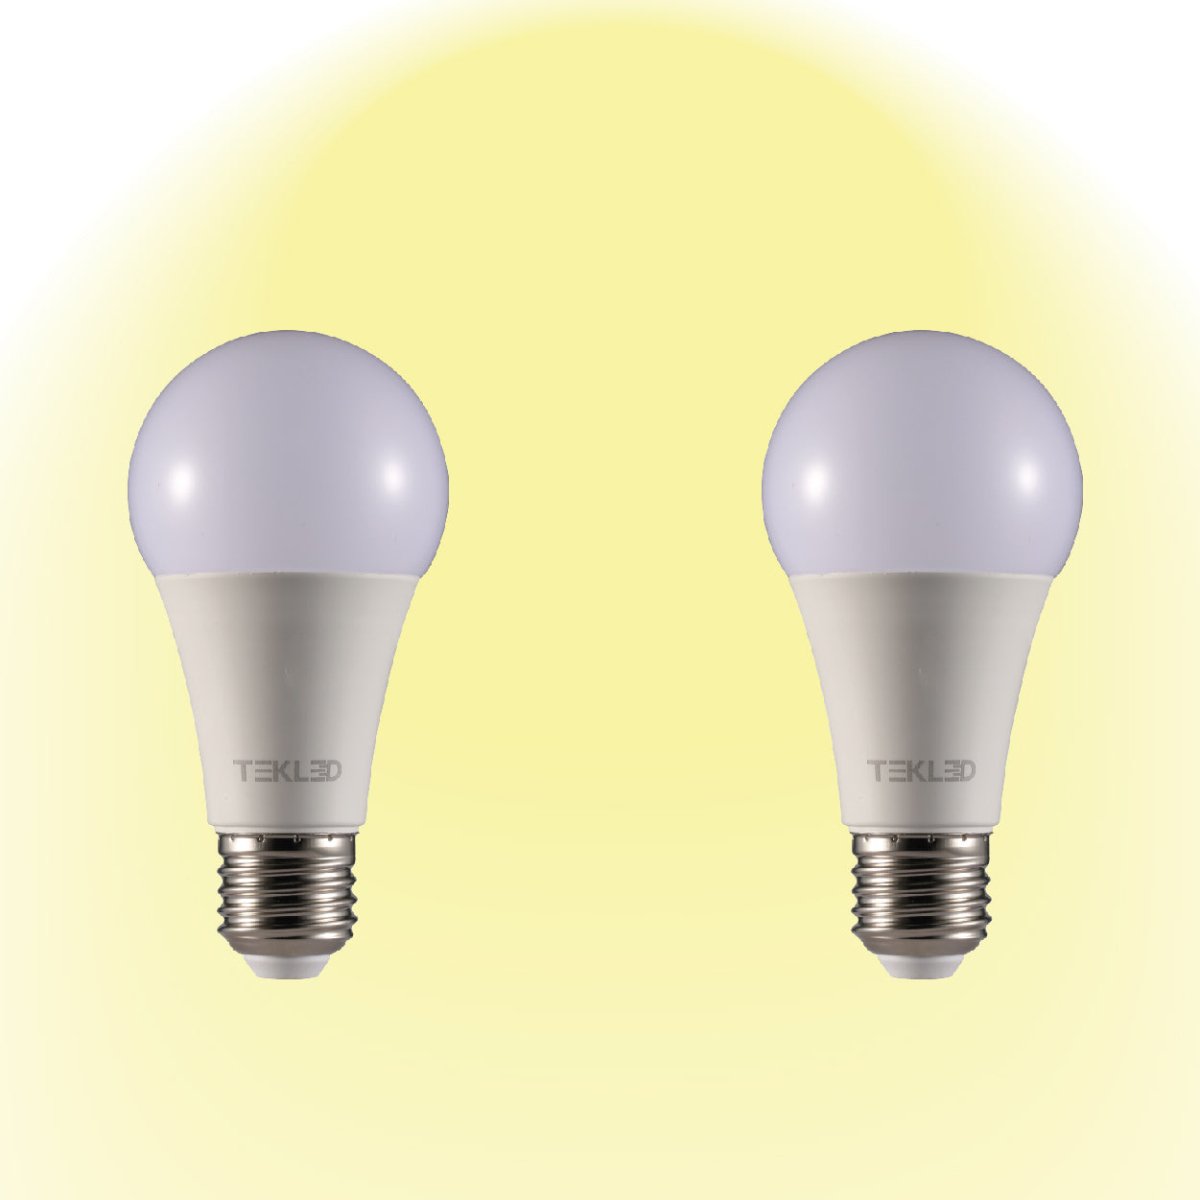 Virgo LED GLS Bulb A60 Dimmable E27 Edison Screw 2700K Warm White 9 W Pack of 2 527-15624